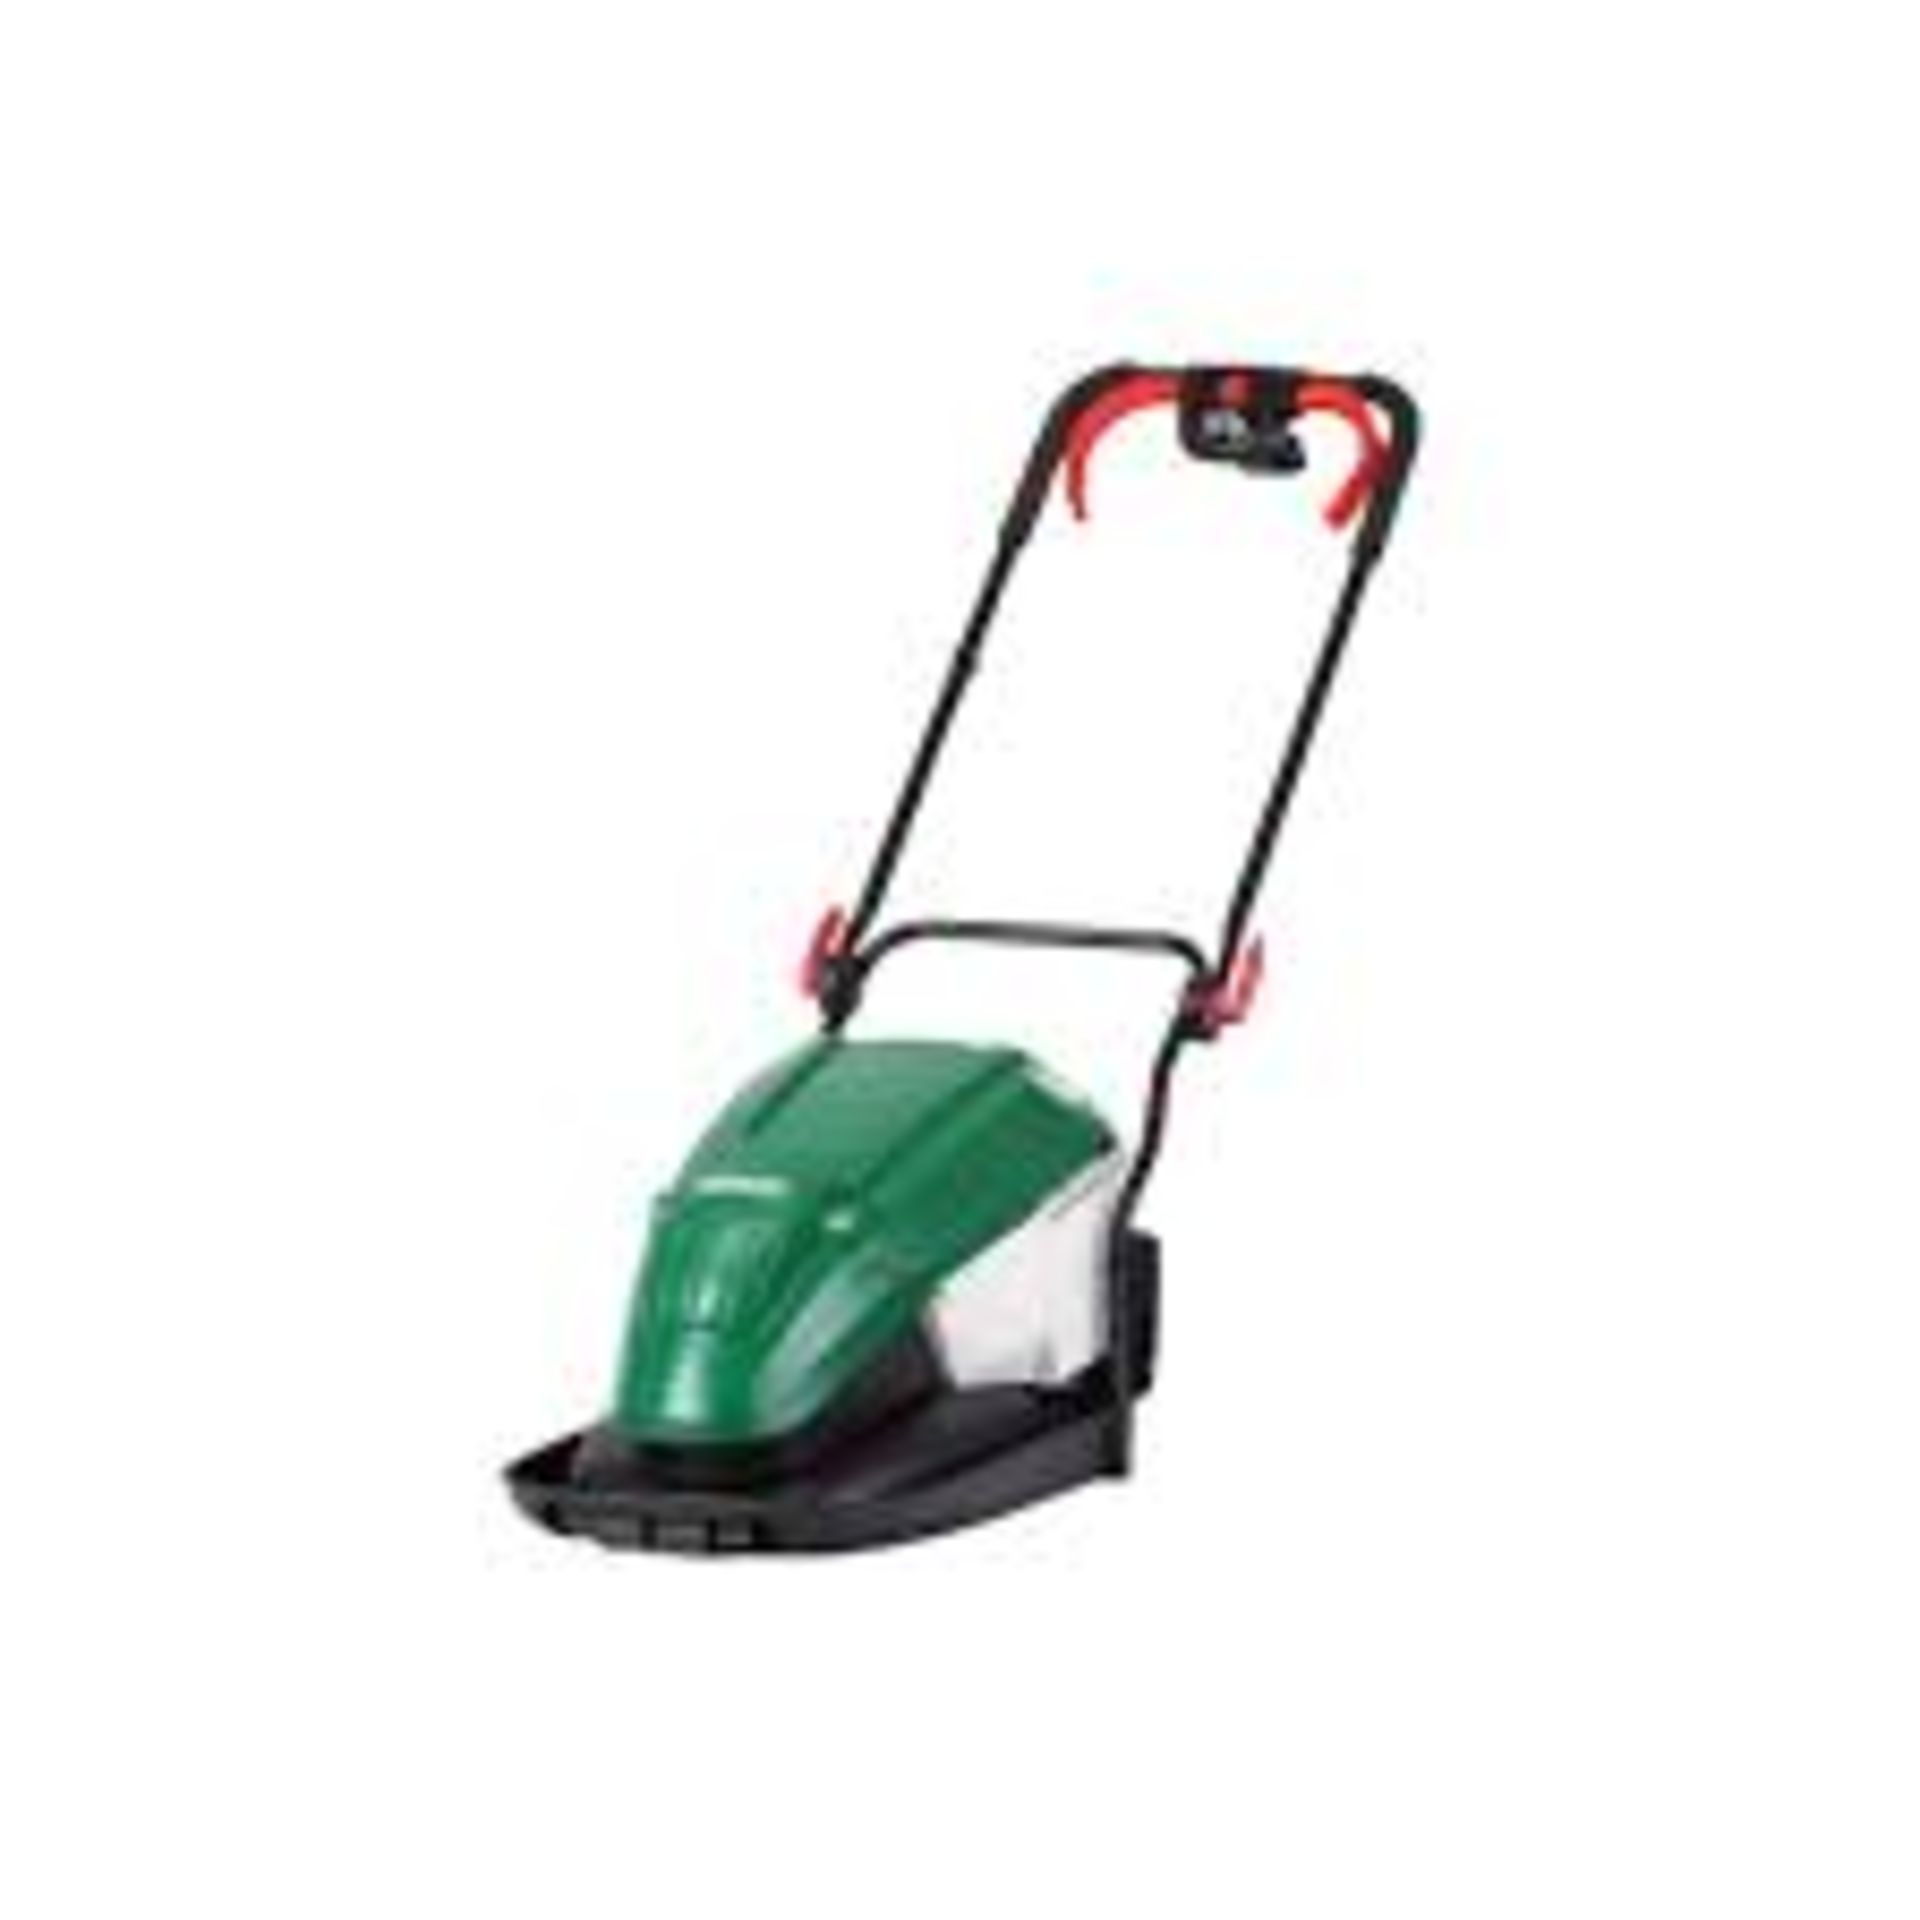 (R14G) 3x Items. 1x Qualcast 39cm 36V Cordless Rotary Lawn Mower (With Battery & Charger). 1x Qualc - Image 2 of 4